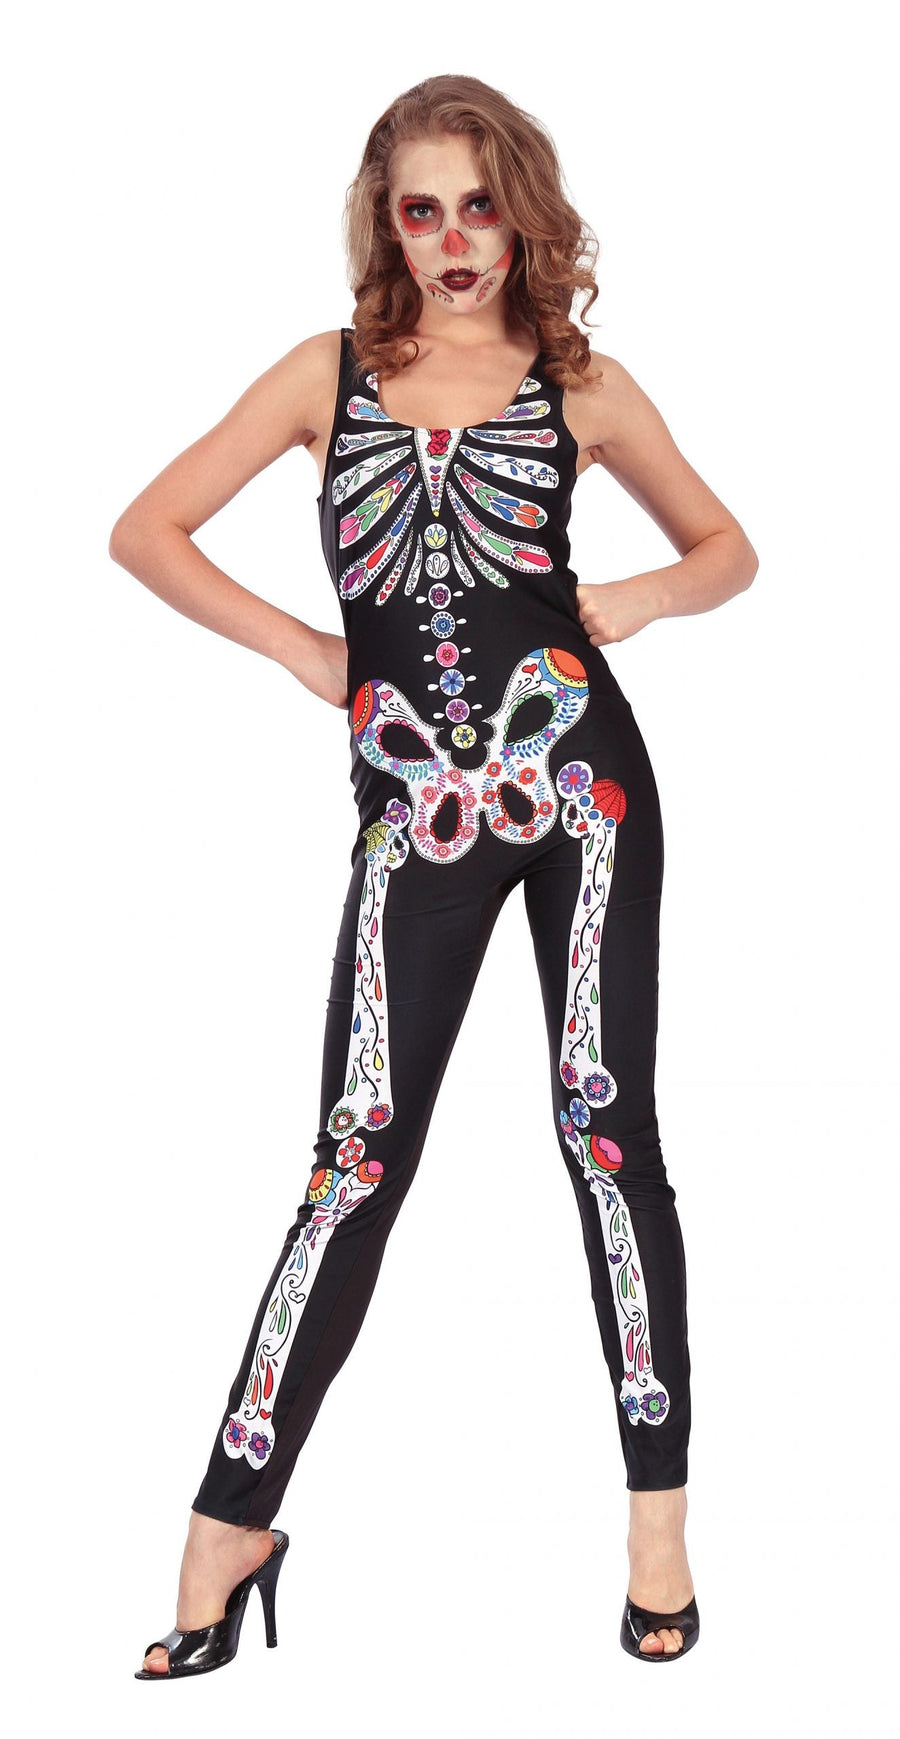 Day Of The Dead Jumpsuit Adult Costume Female Uk Size 10 14_1